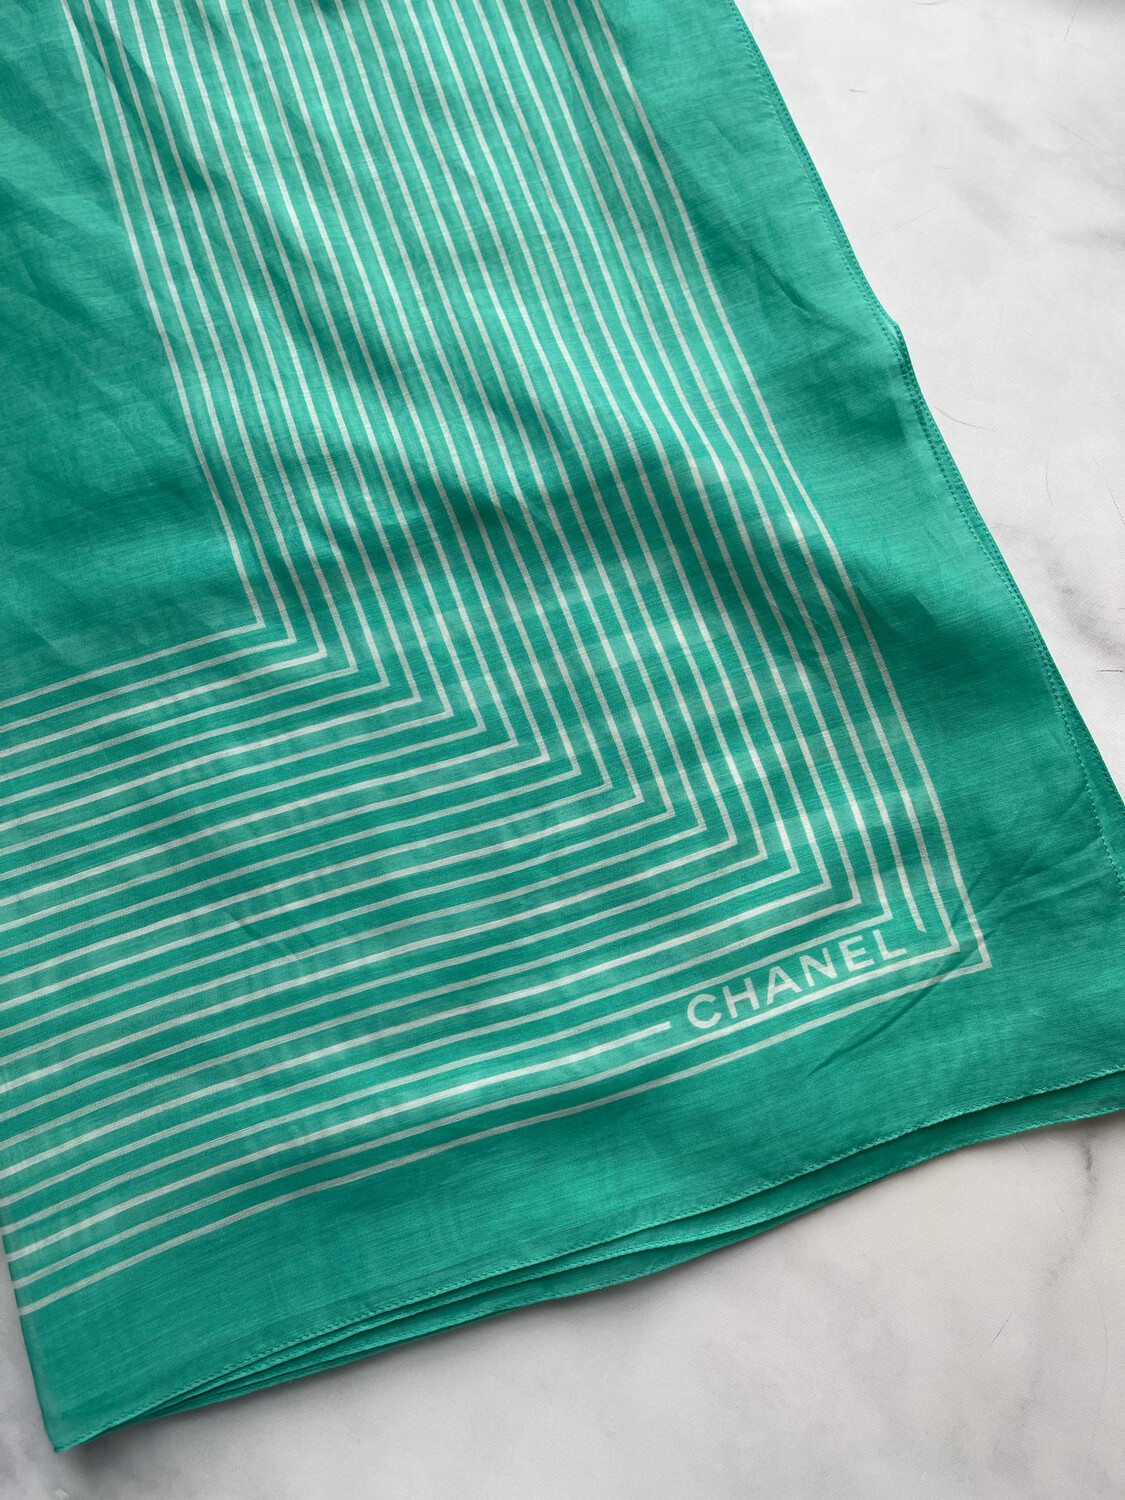 Chanel Scarf Lightweight Silk And Cotton, Green, New - No Box